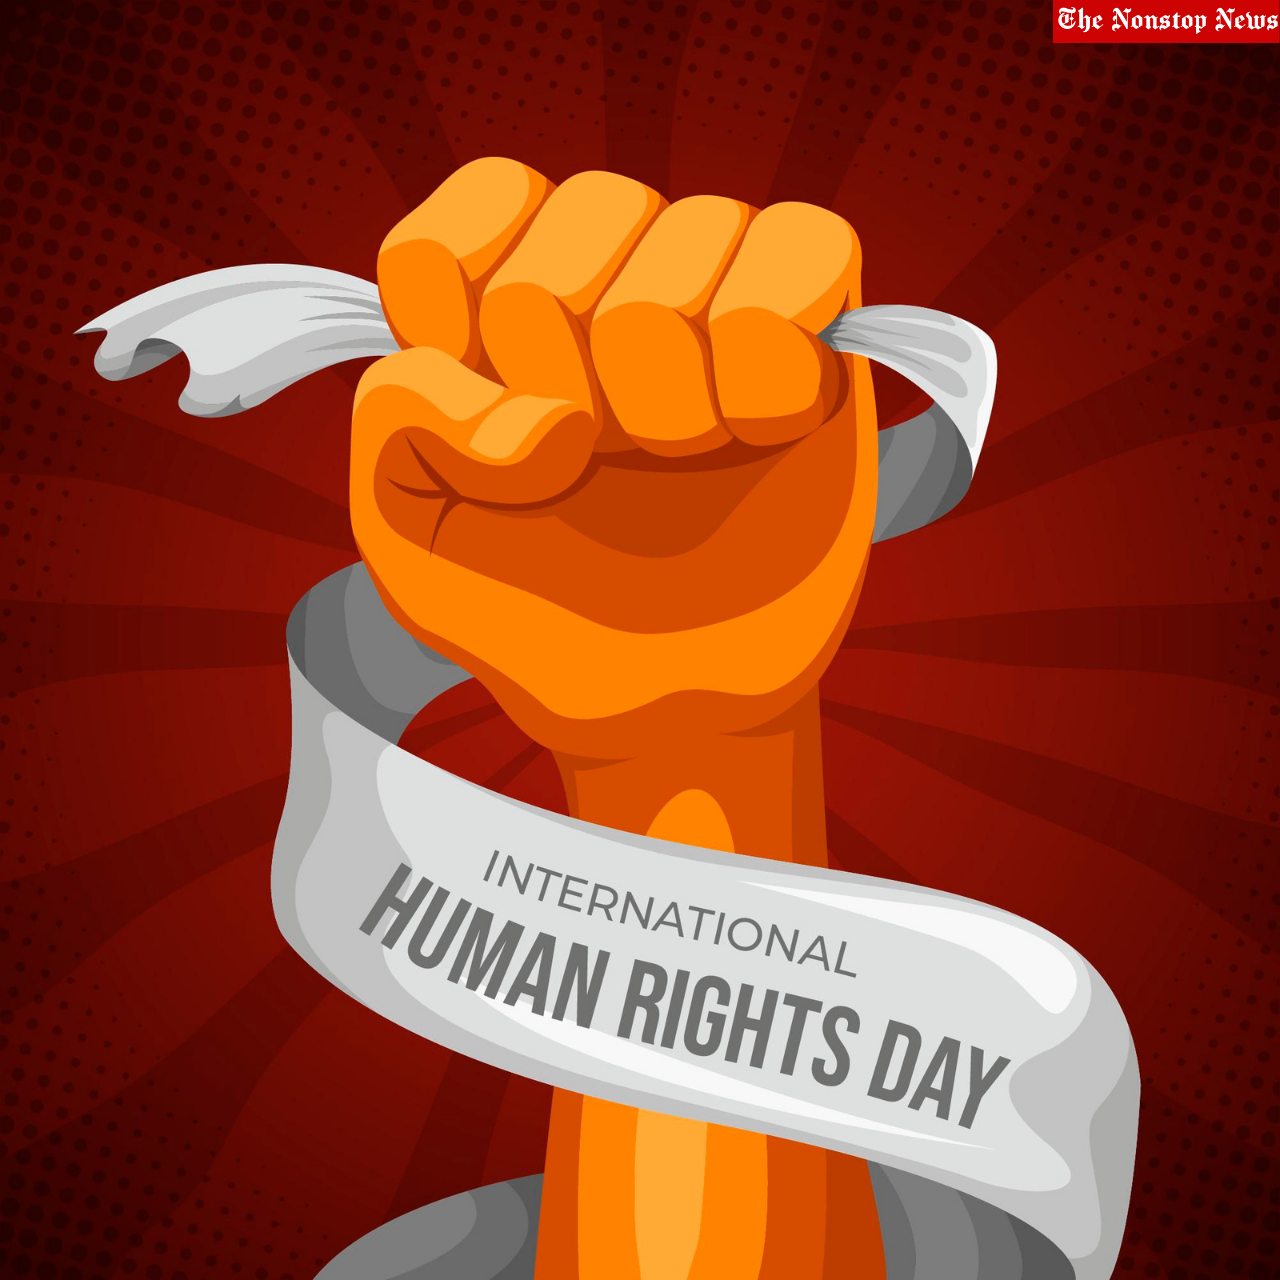 International Human Solidarity Day 2021 Quotes, Images, Poster, Messages to create awareness